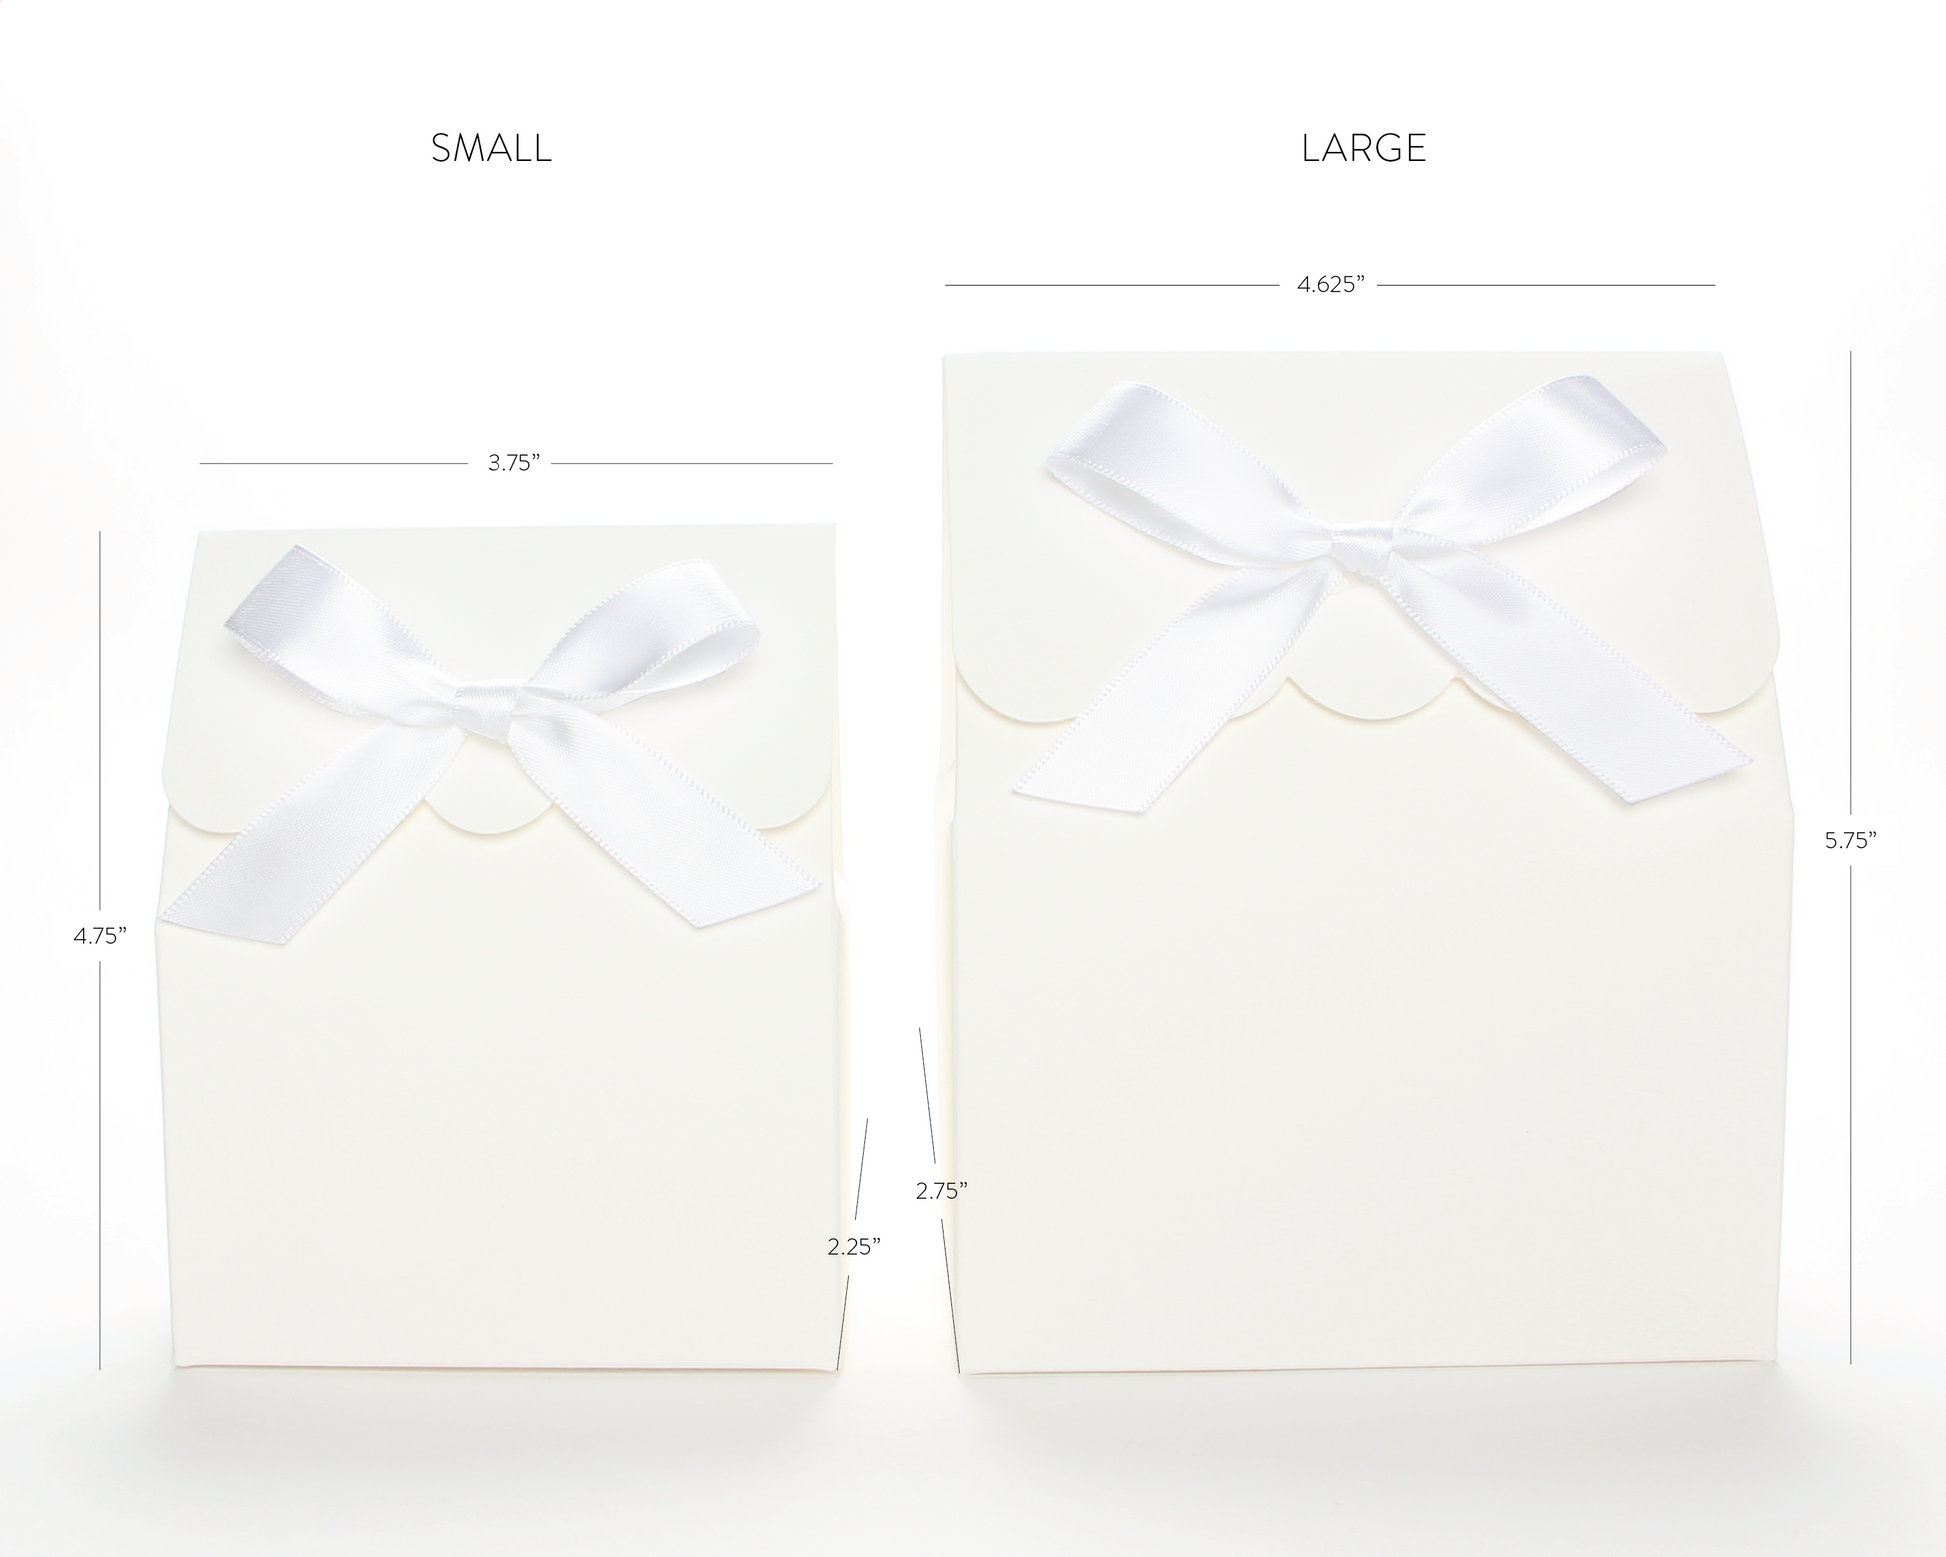 Lux Party’s small white favor box and large white favor box, side by side, showing dimensions of each.